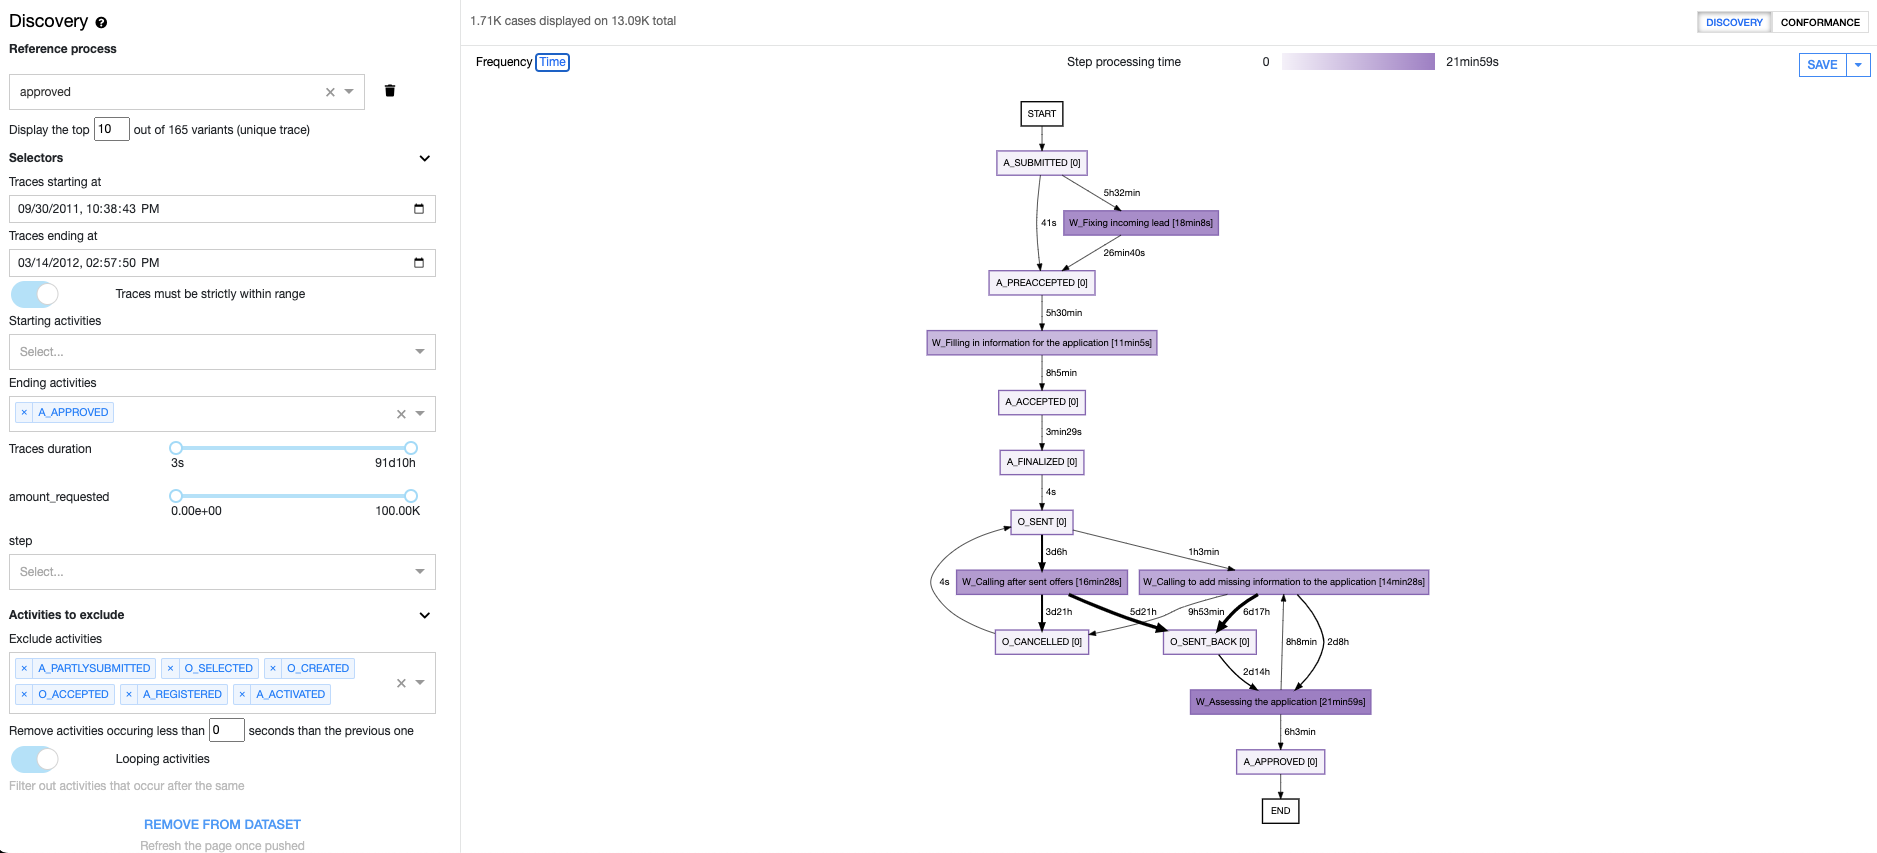 Dataiku screenshot of the process discovery available in the webapp.